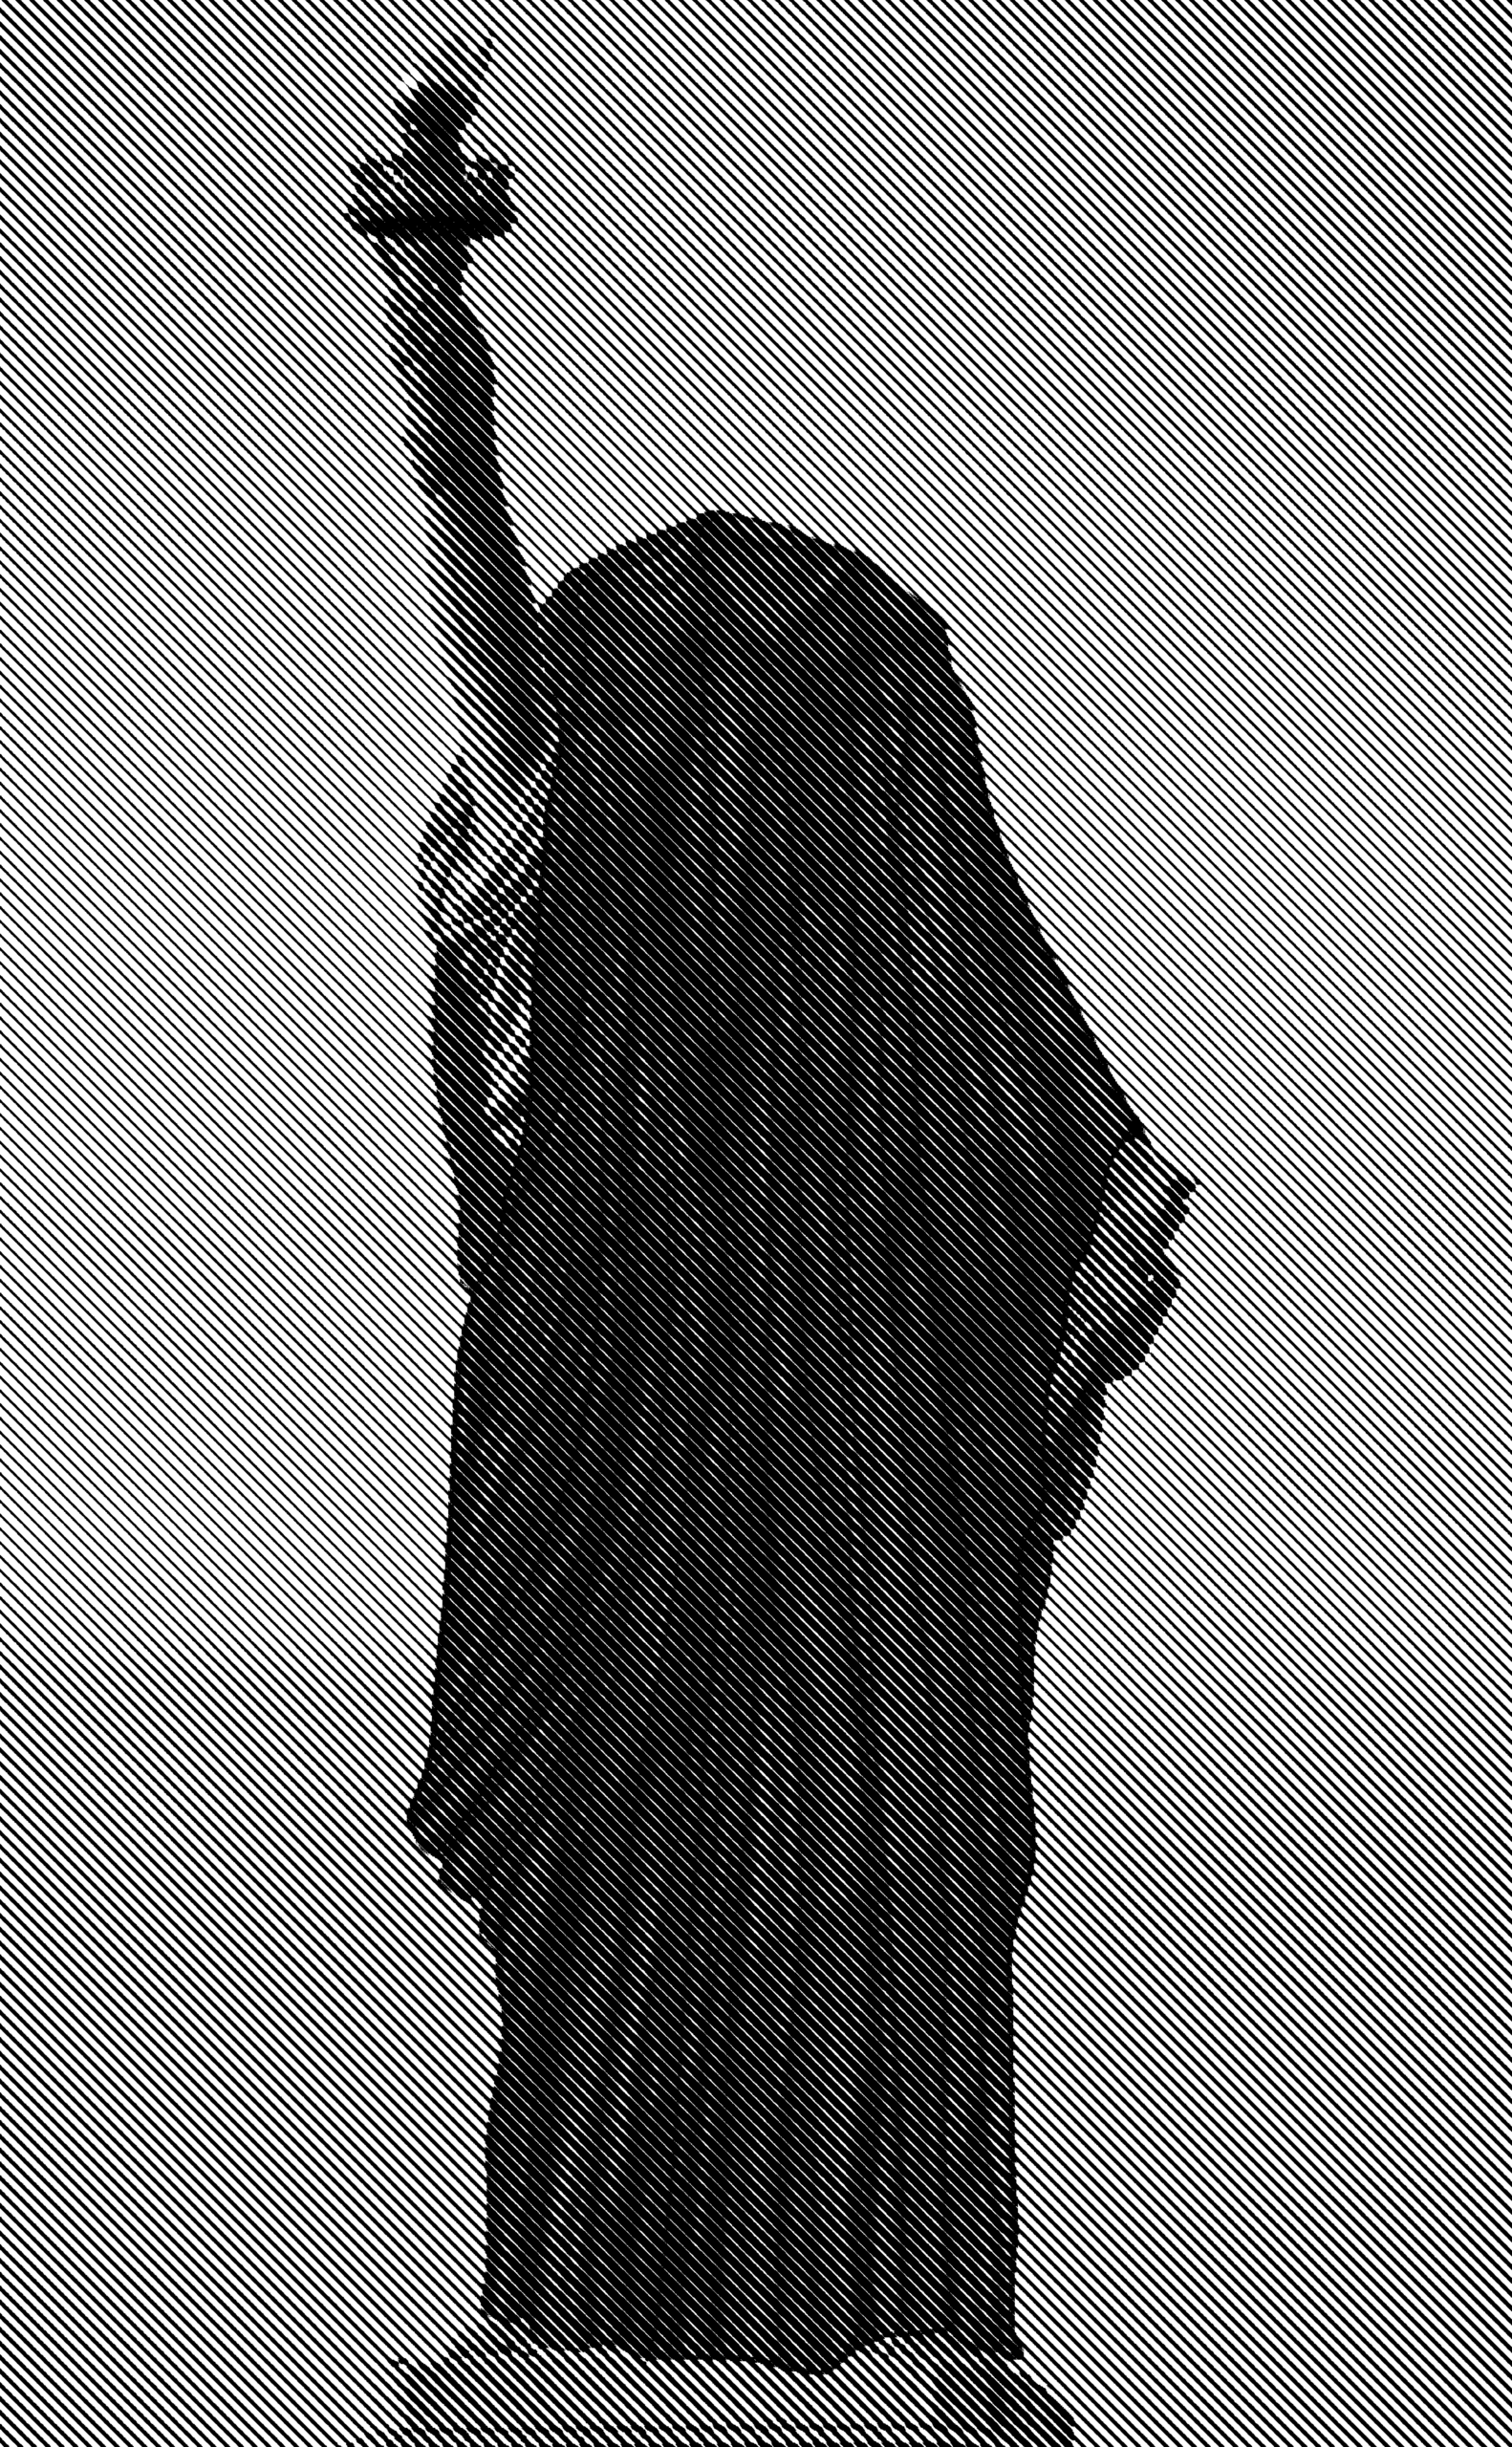 Statue of Liberty covered in a fabric 